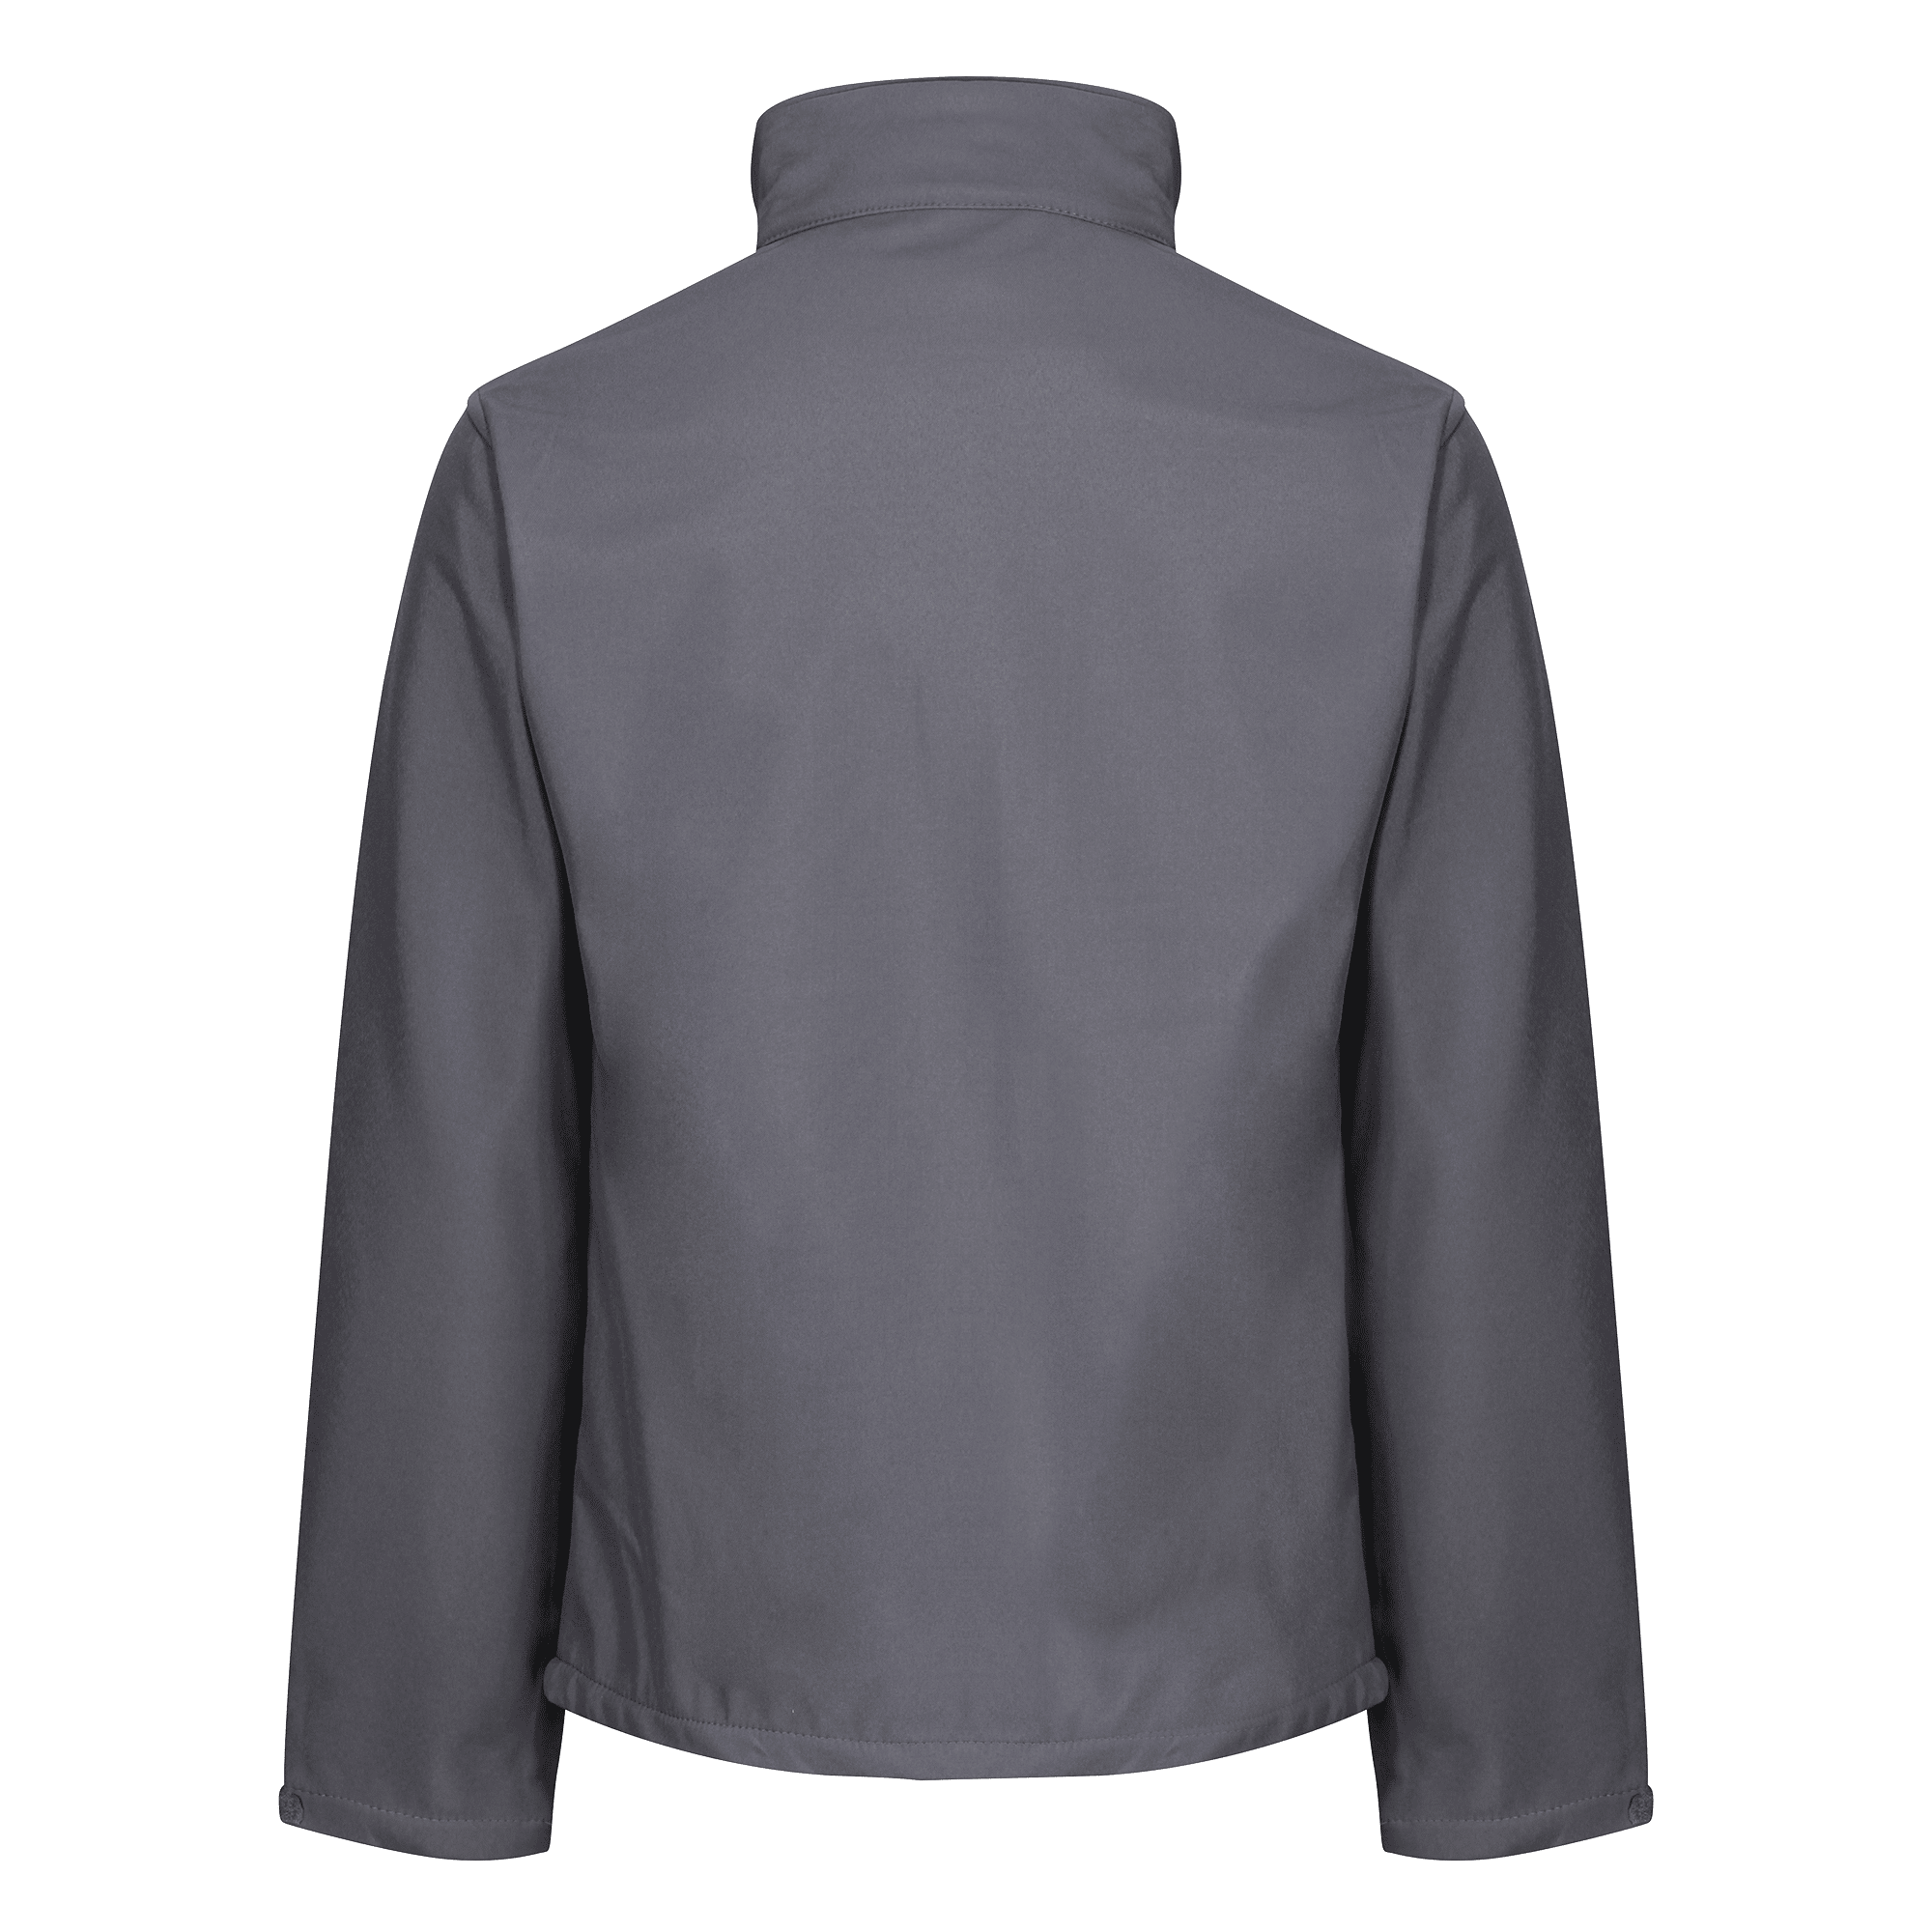 Essential's 3-Layer Softshell Jacket | SUPER DEAL!